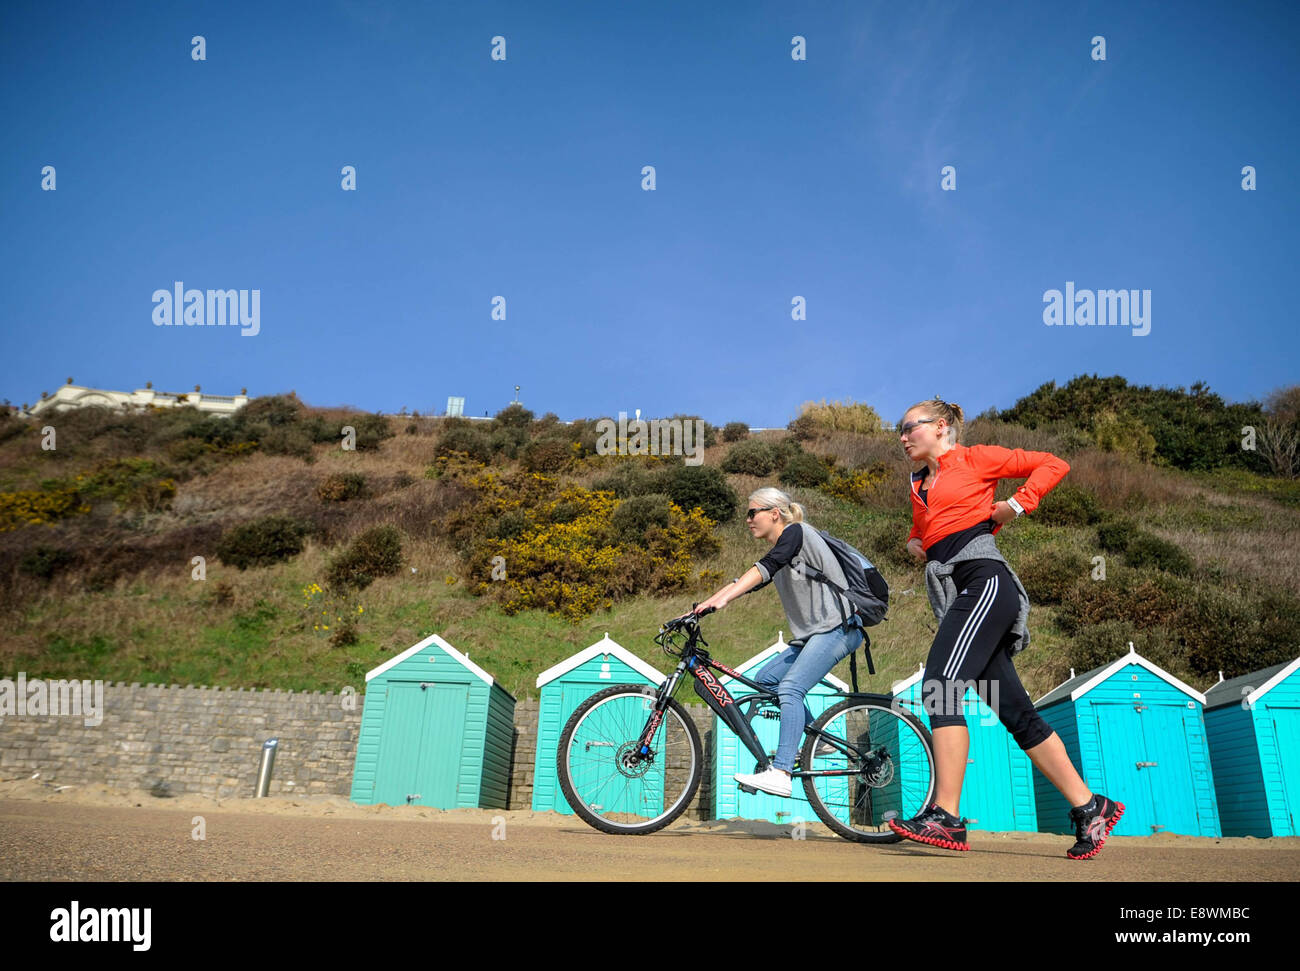 Two women are seen exercising in the sun in front of beach huts on the sea front in Bournemouth Stock Photo